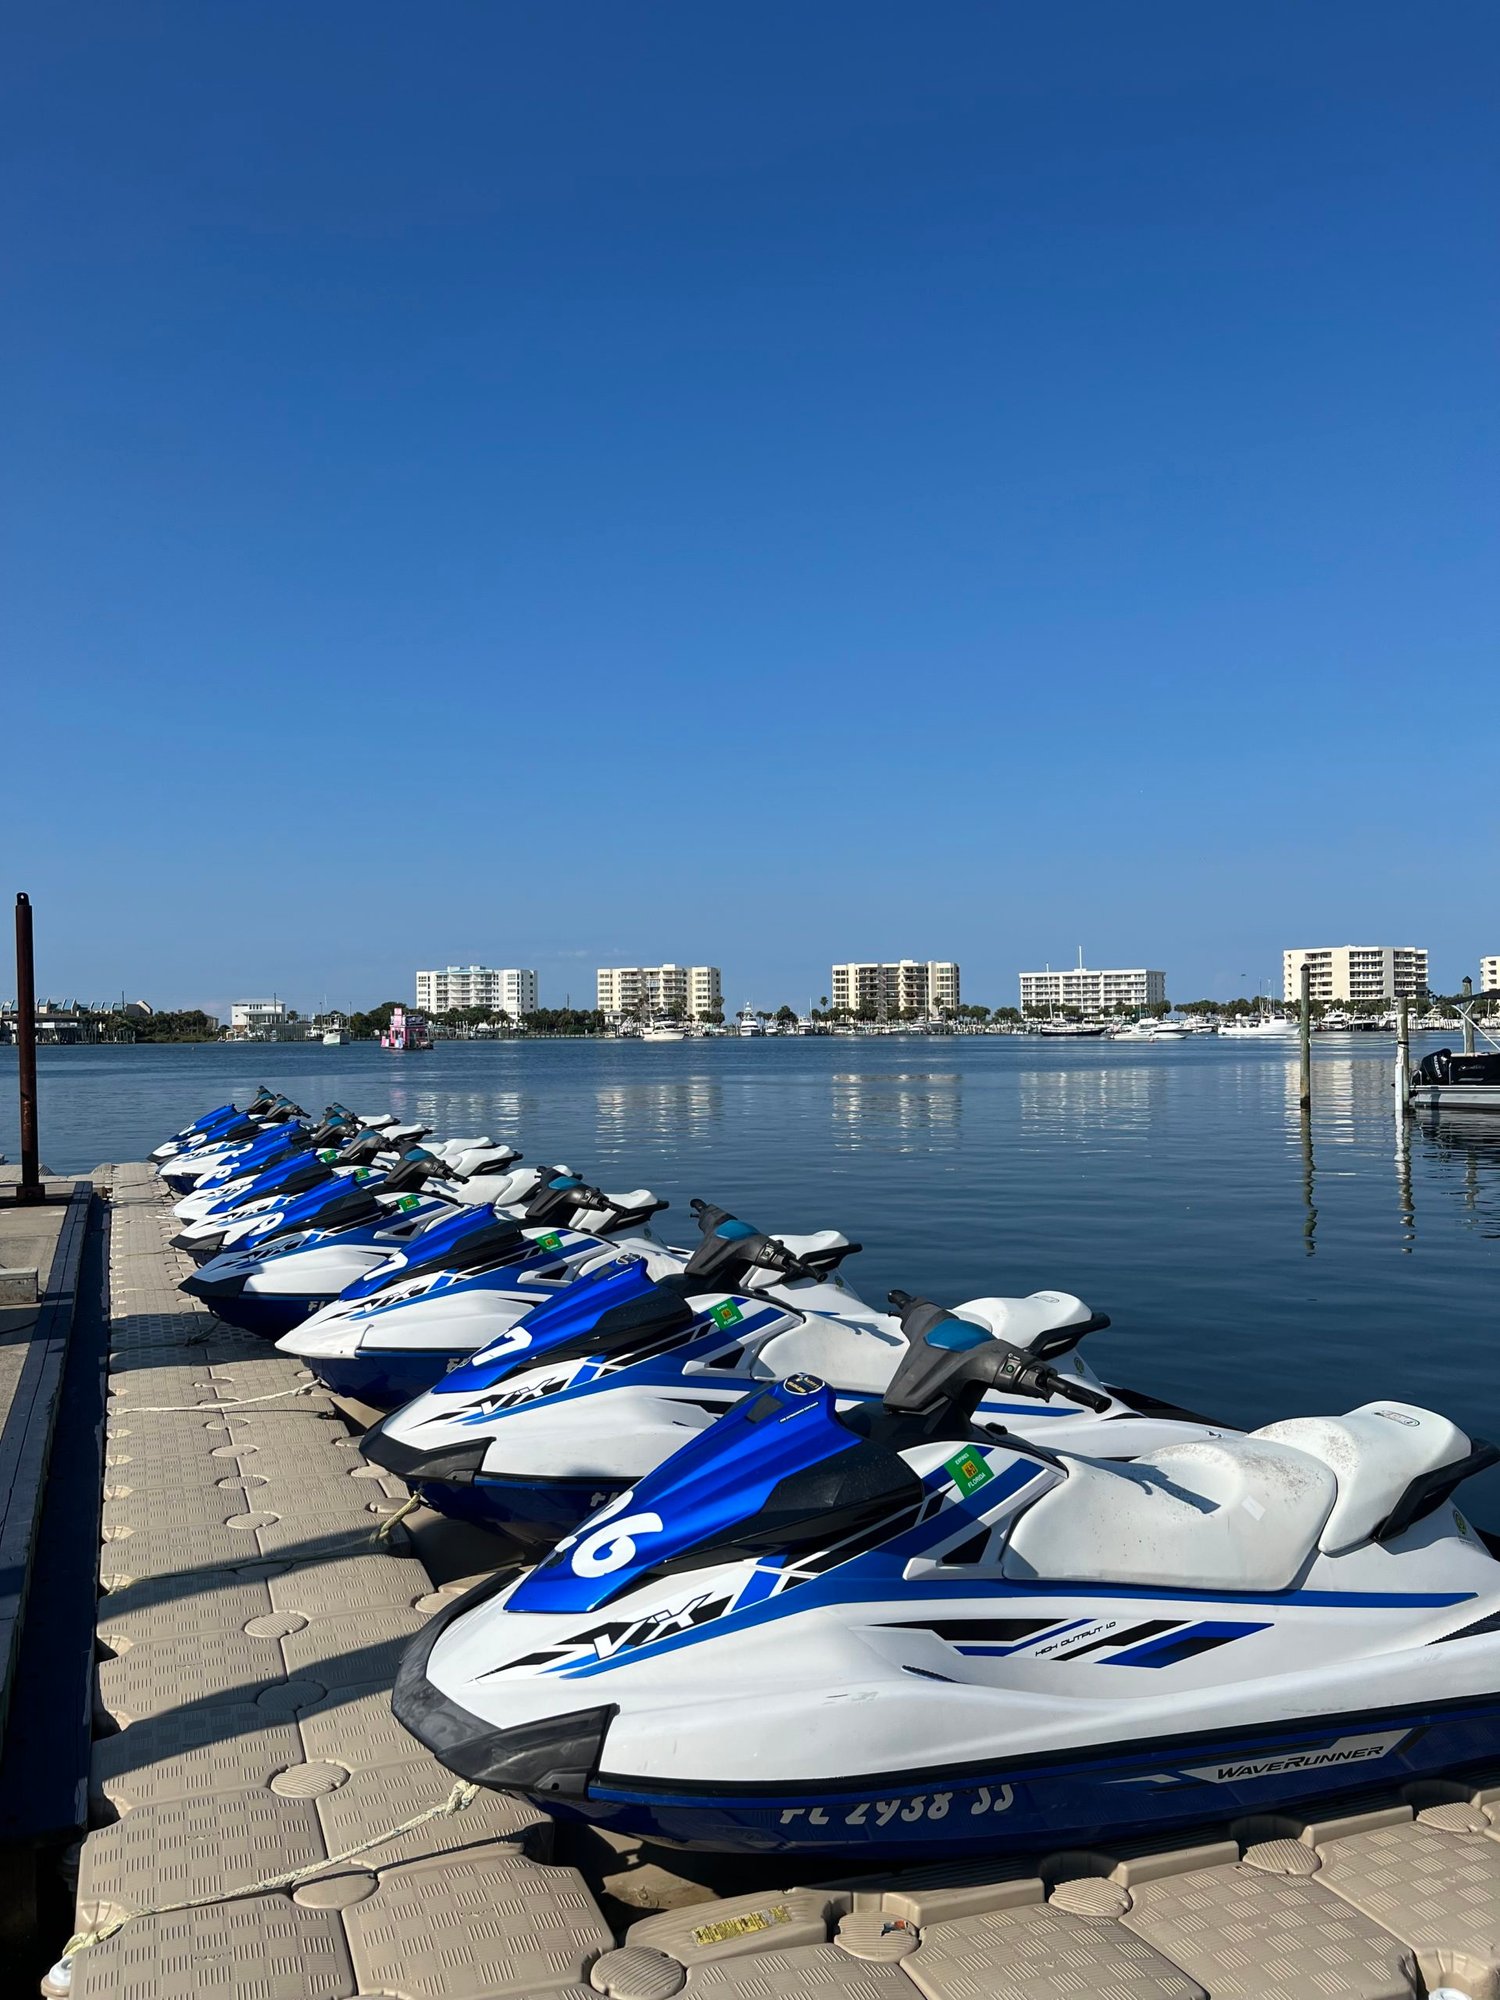 six jet skis lined up in the water in destin, florida